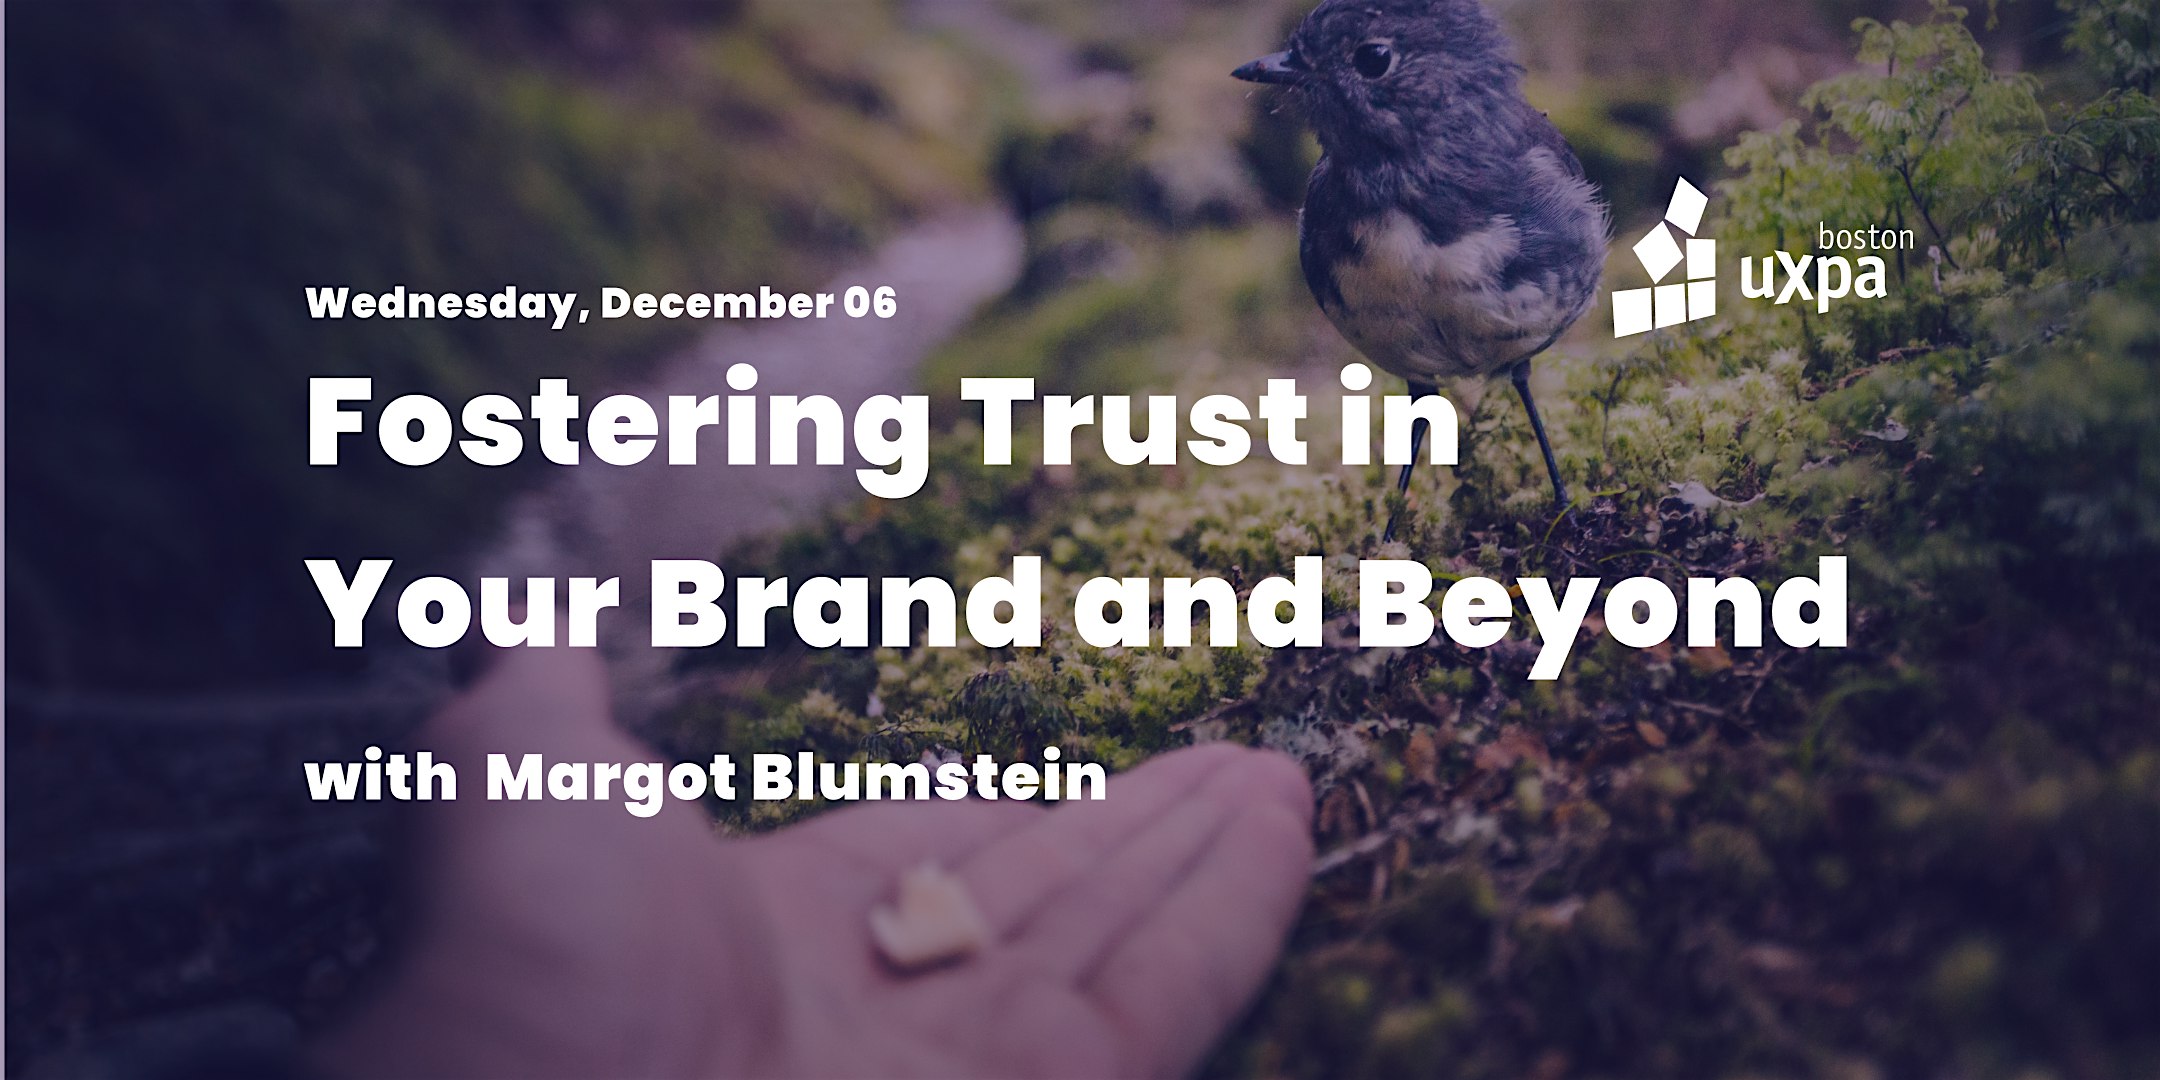 Fostering Trust in Your Brand and Beyond